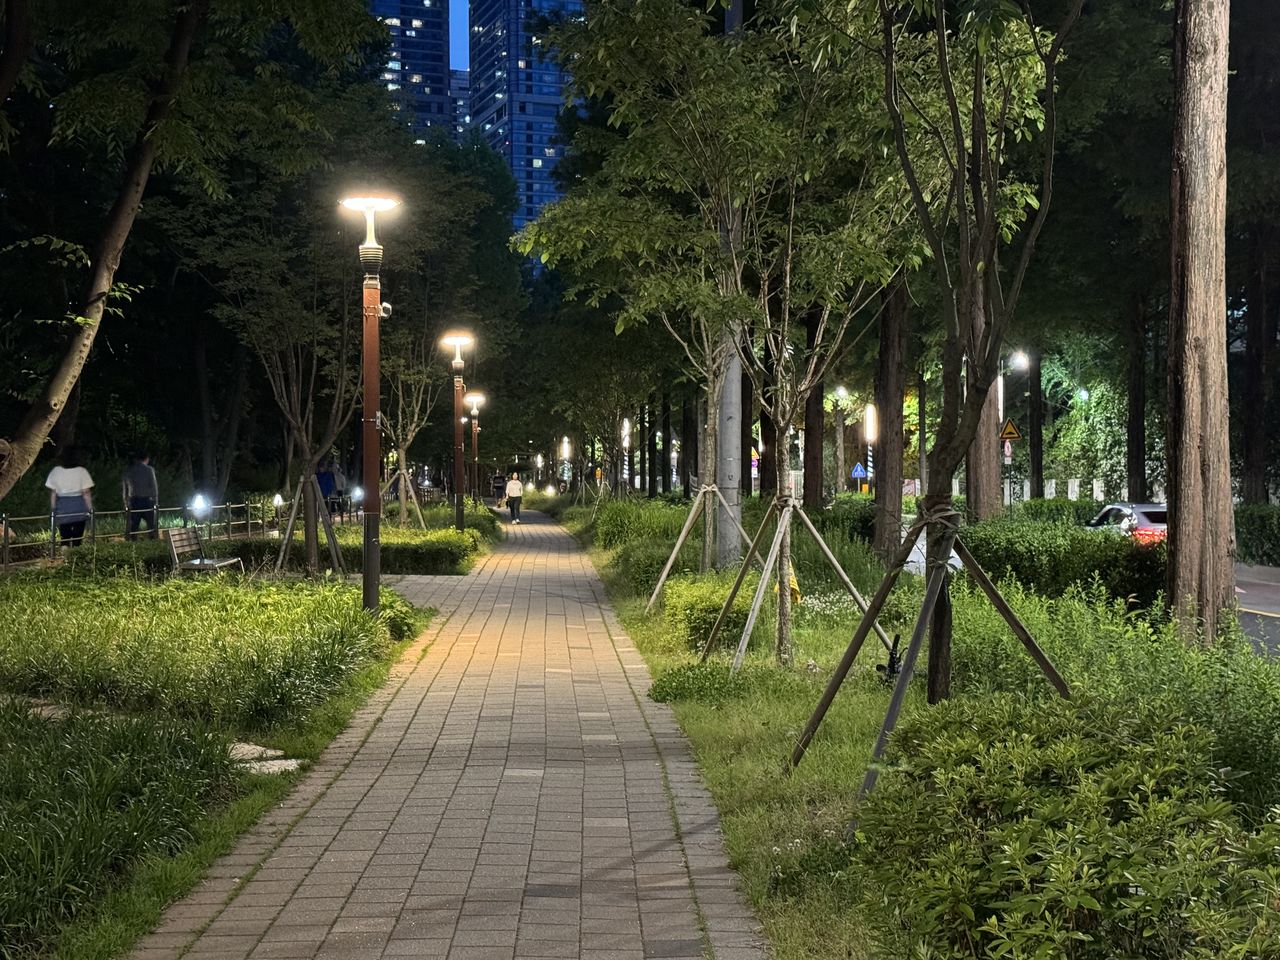 plant, tree, street light, illuminated, night, footpath, street, the way forward, lighting equipment, nature, city, architecture, park, growth, urban area, lighting, park - man made space, road, neighbourhood, green, no people, grass, built structure, diminishing perspective, outdoors, building exterior, treelined, tree trunk, trunk, transportation, walkway, light